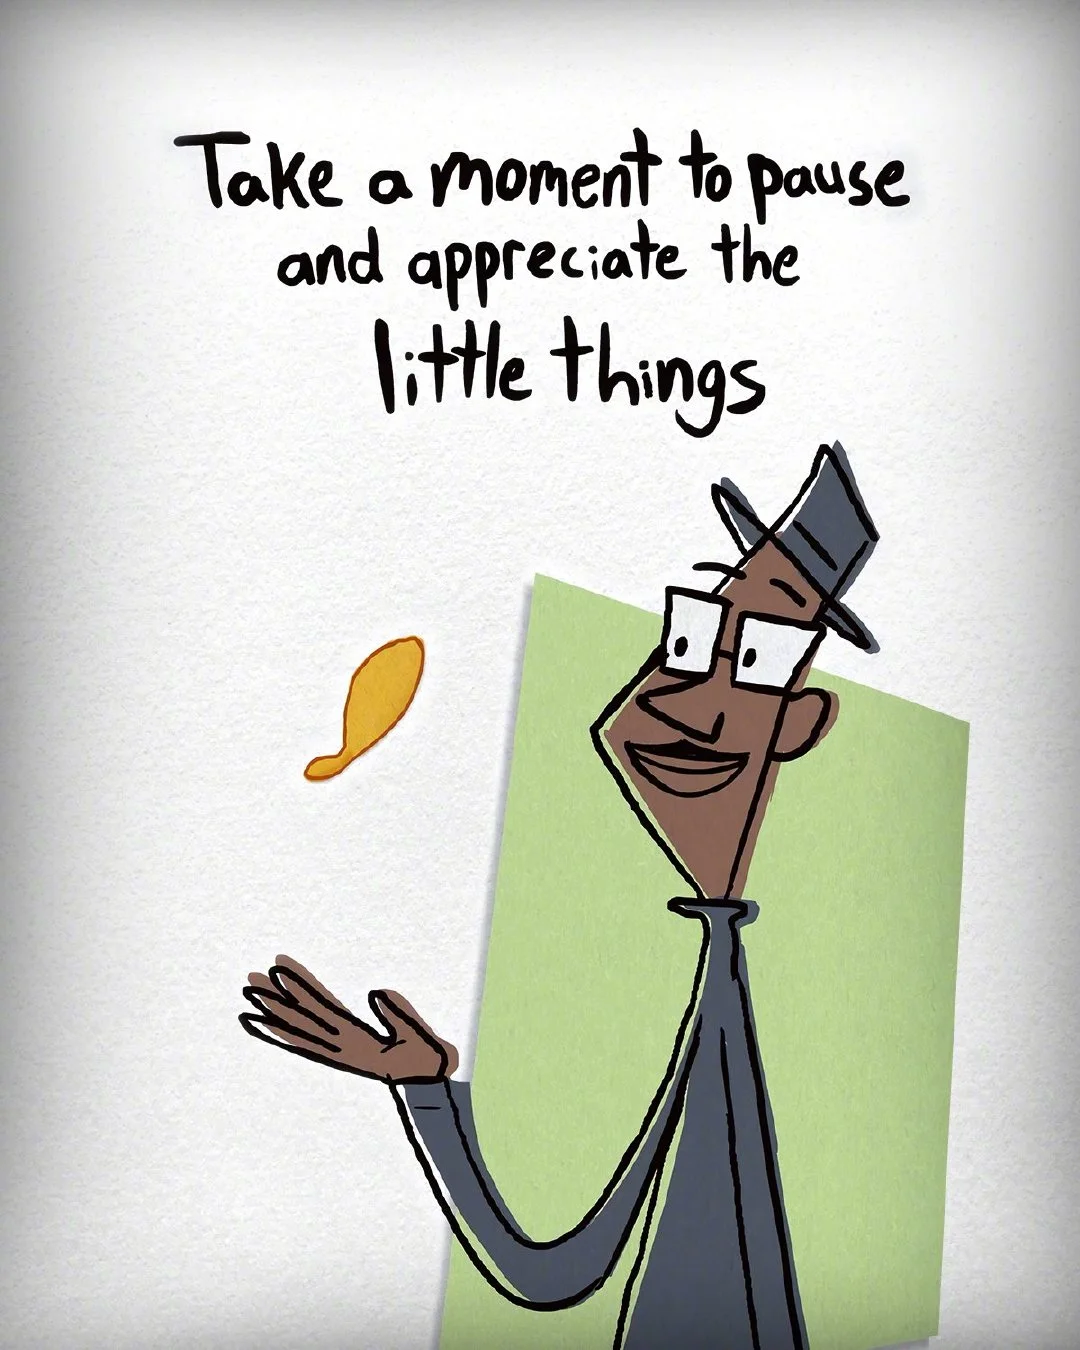 Pixar shares a collection of 'Soul' art to remind you to live in the moment